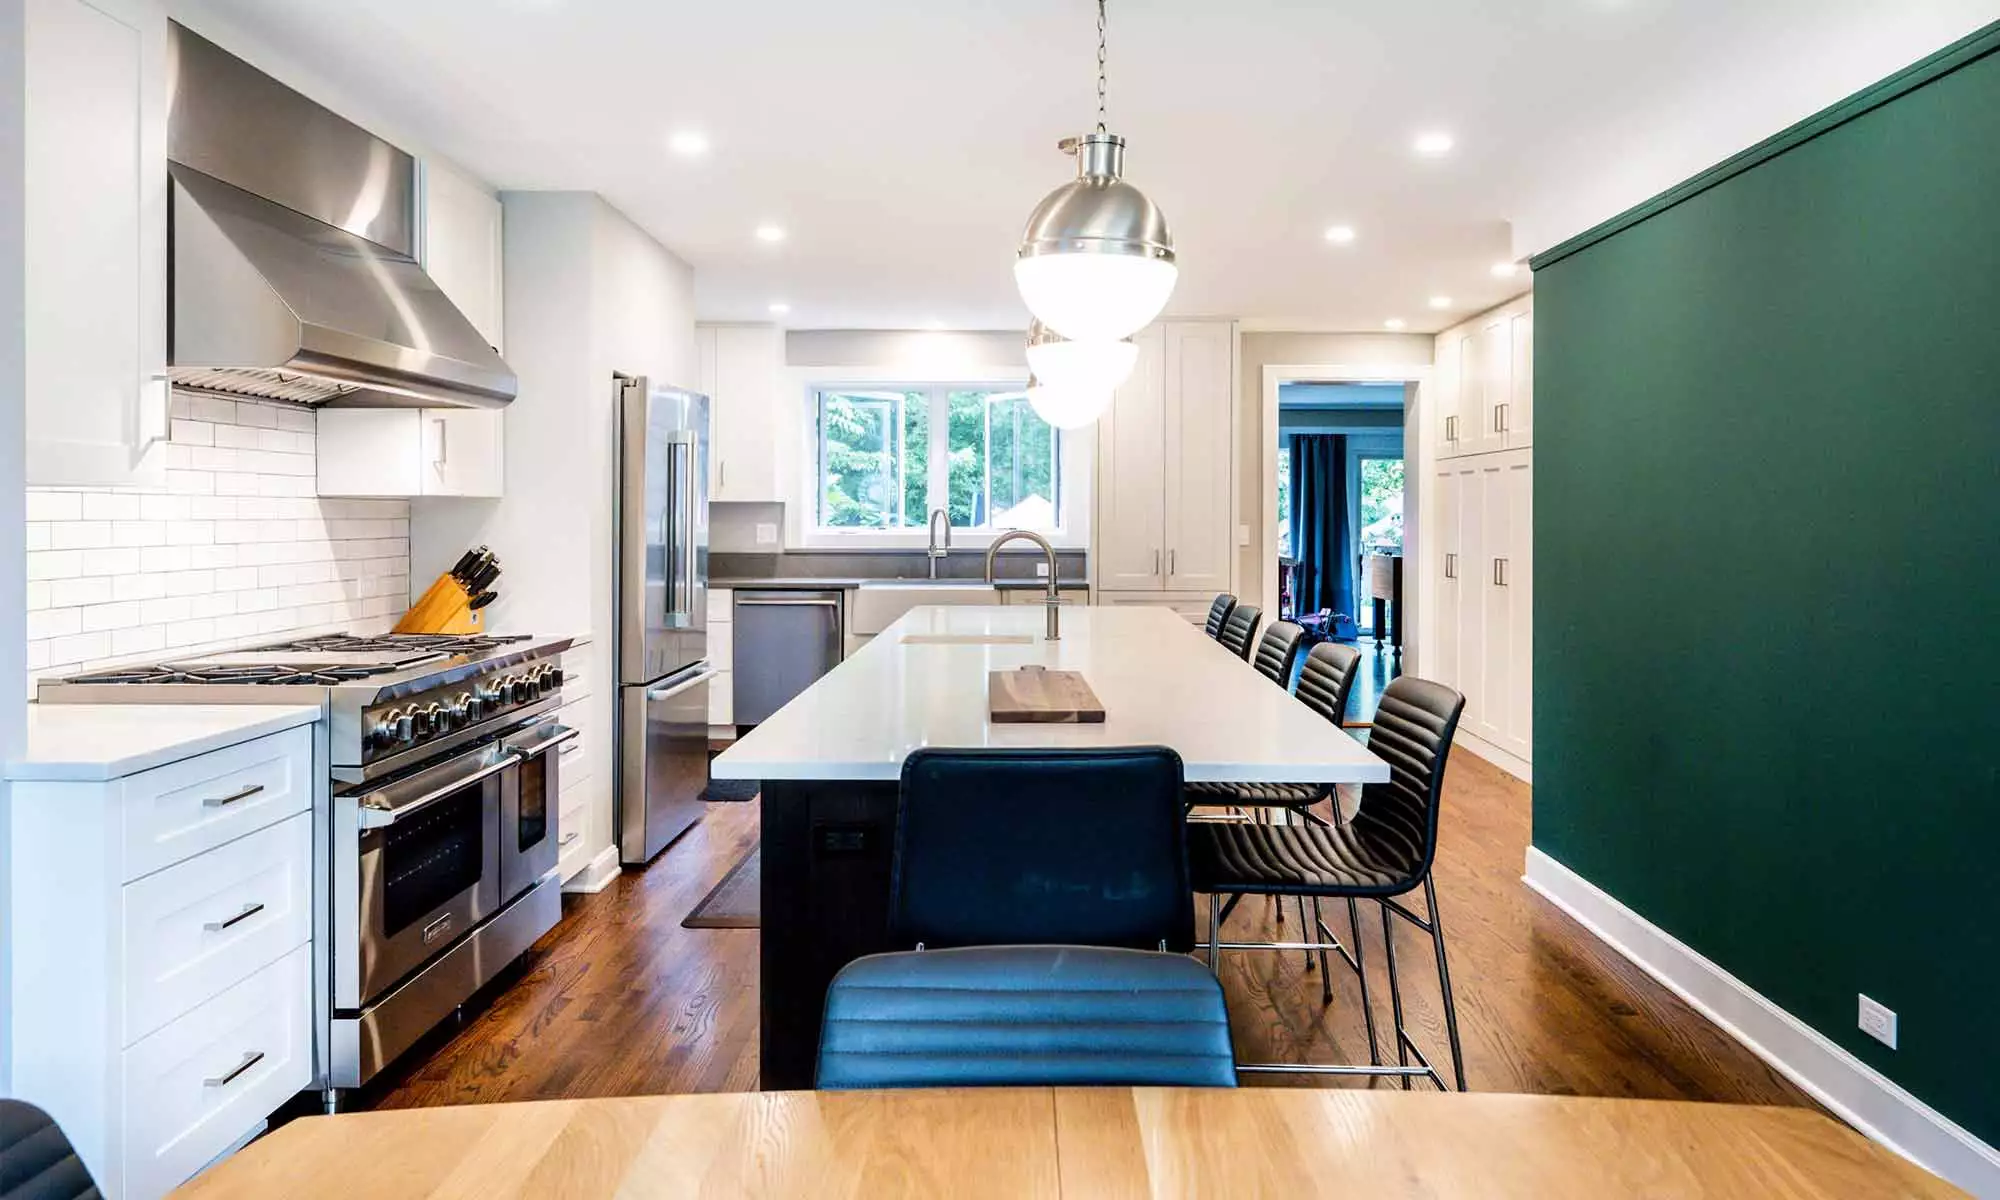 Long view of light-toned updated kitchen with new stainless steel appliances & dark green accent wall on the right